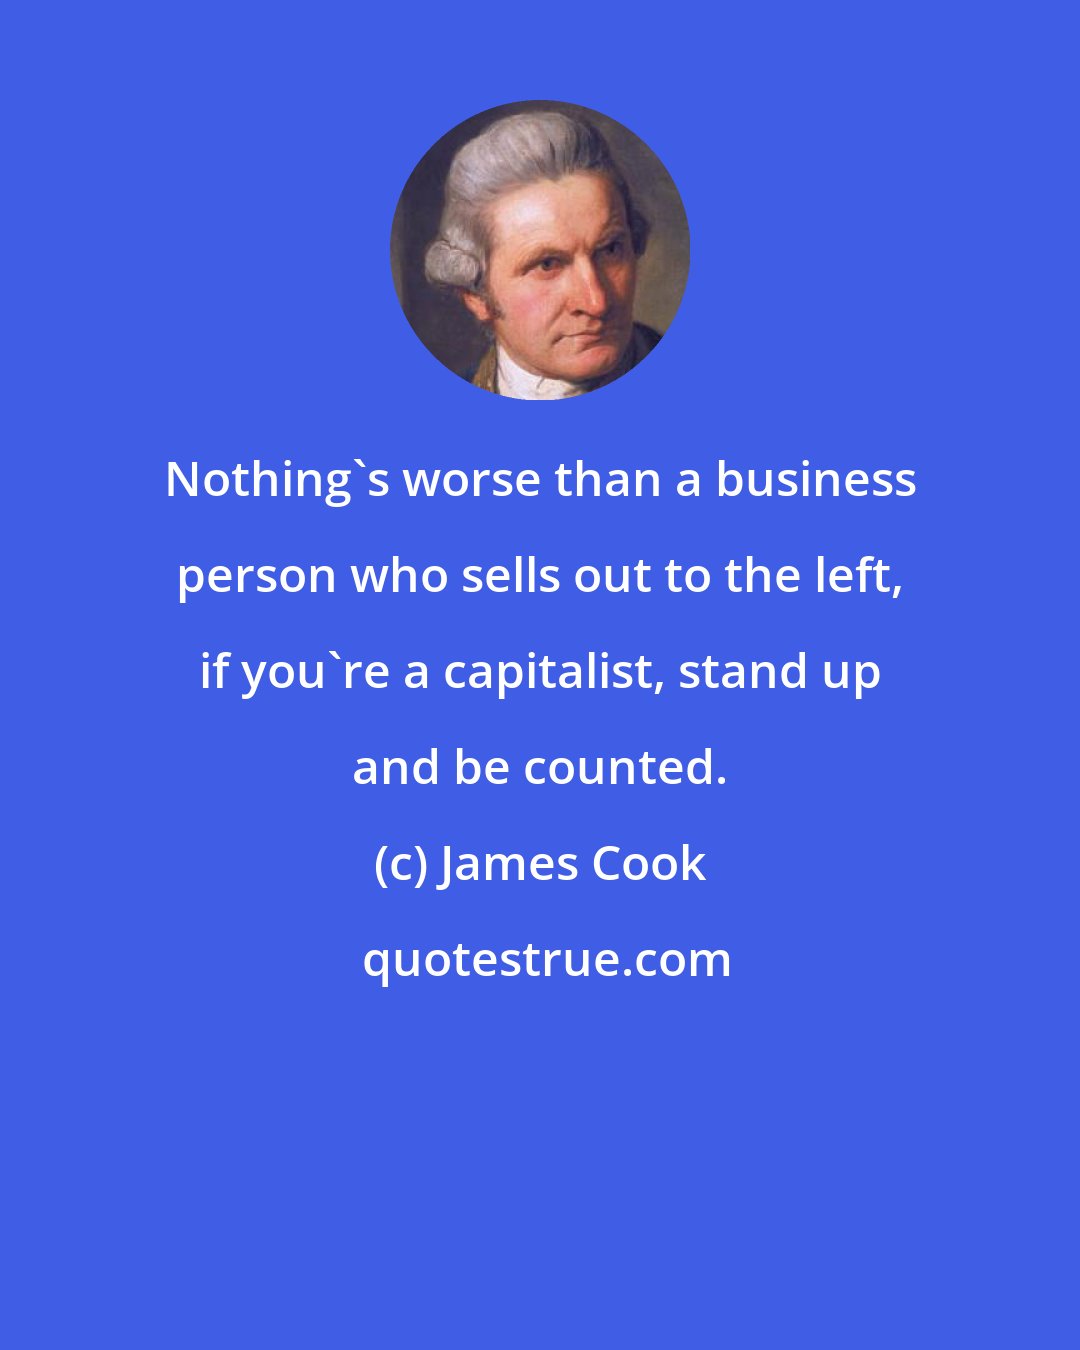 James Cook: Nothing's worse than a business person who sells out to the left, if you're a capitalist, stand up and be counted.